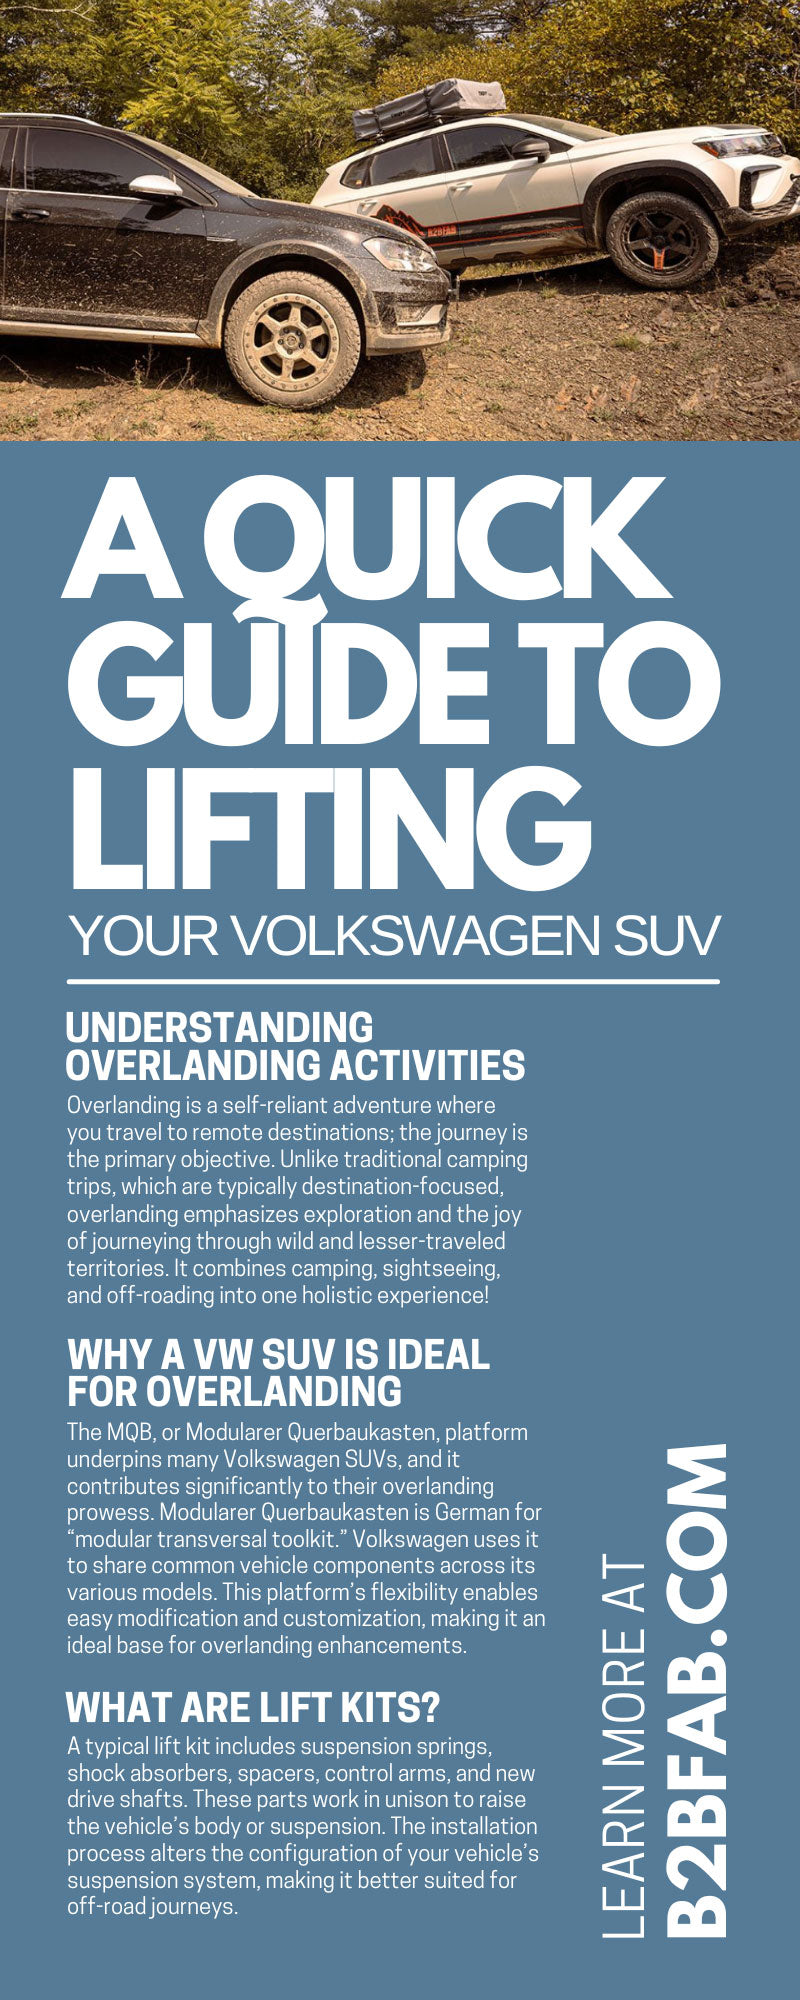 A Quick Guide to Lifting Your Volkswagen SUV